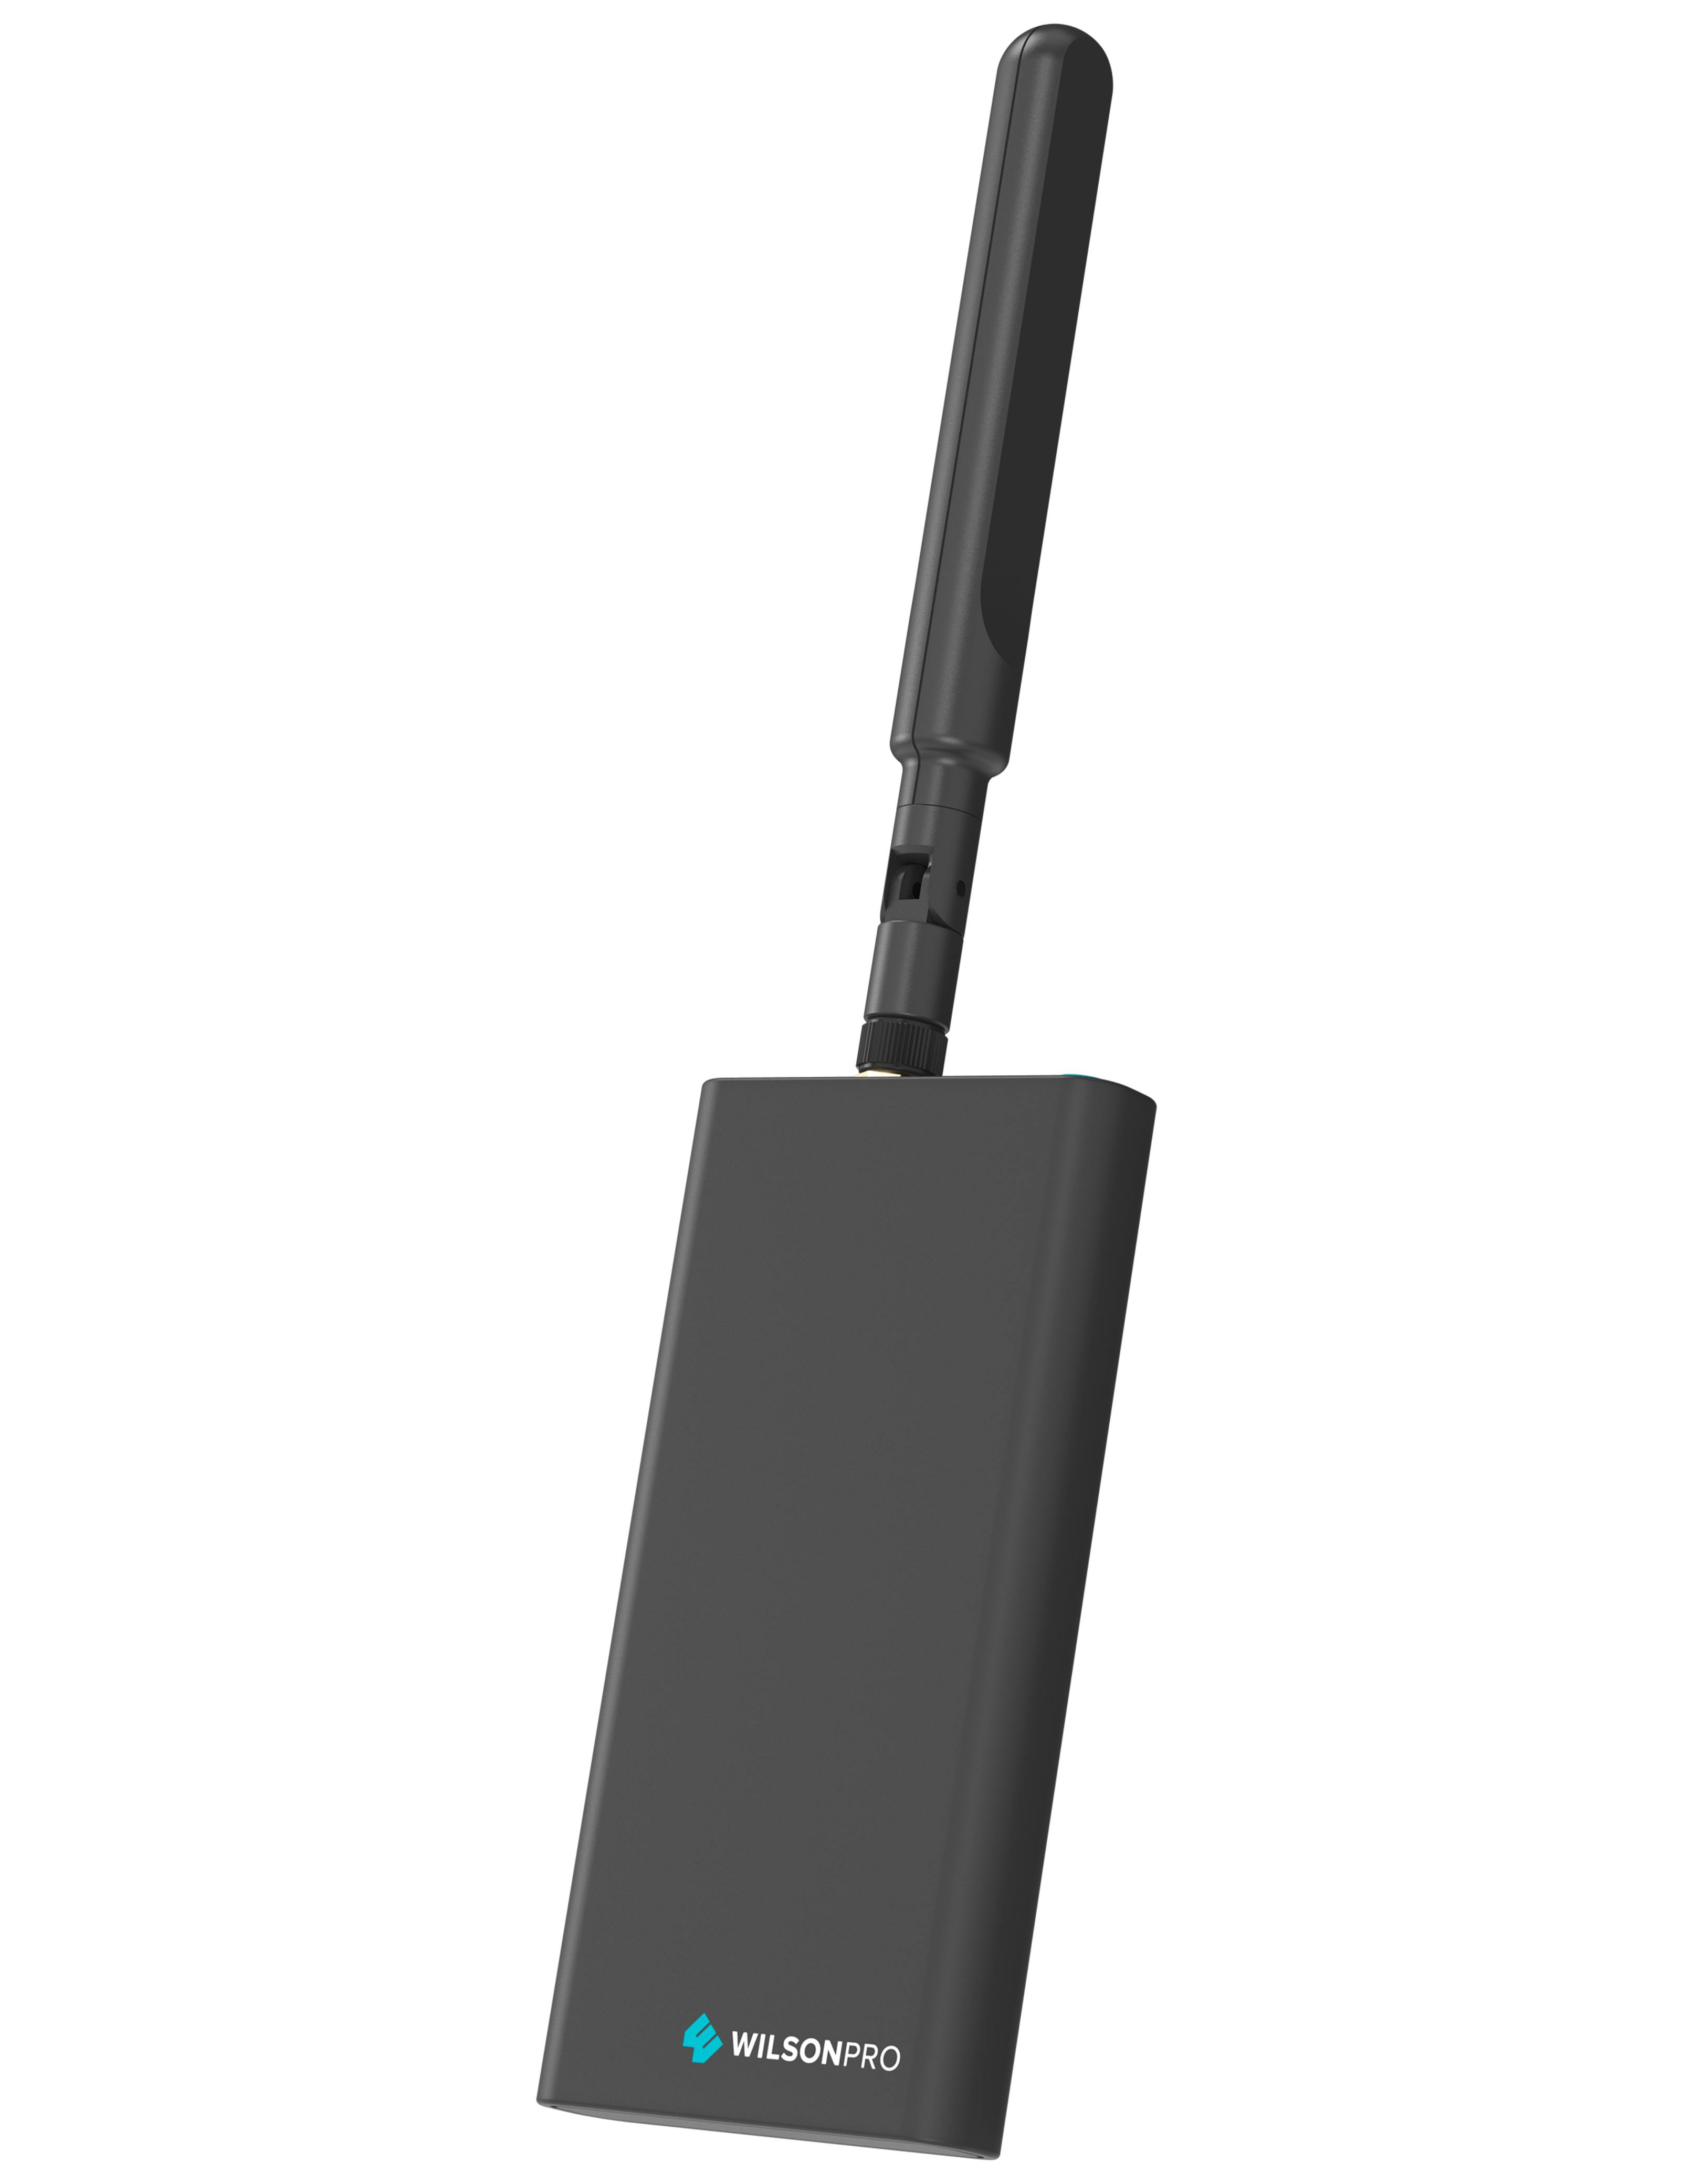 Scanner with attached antenna